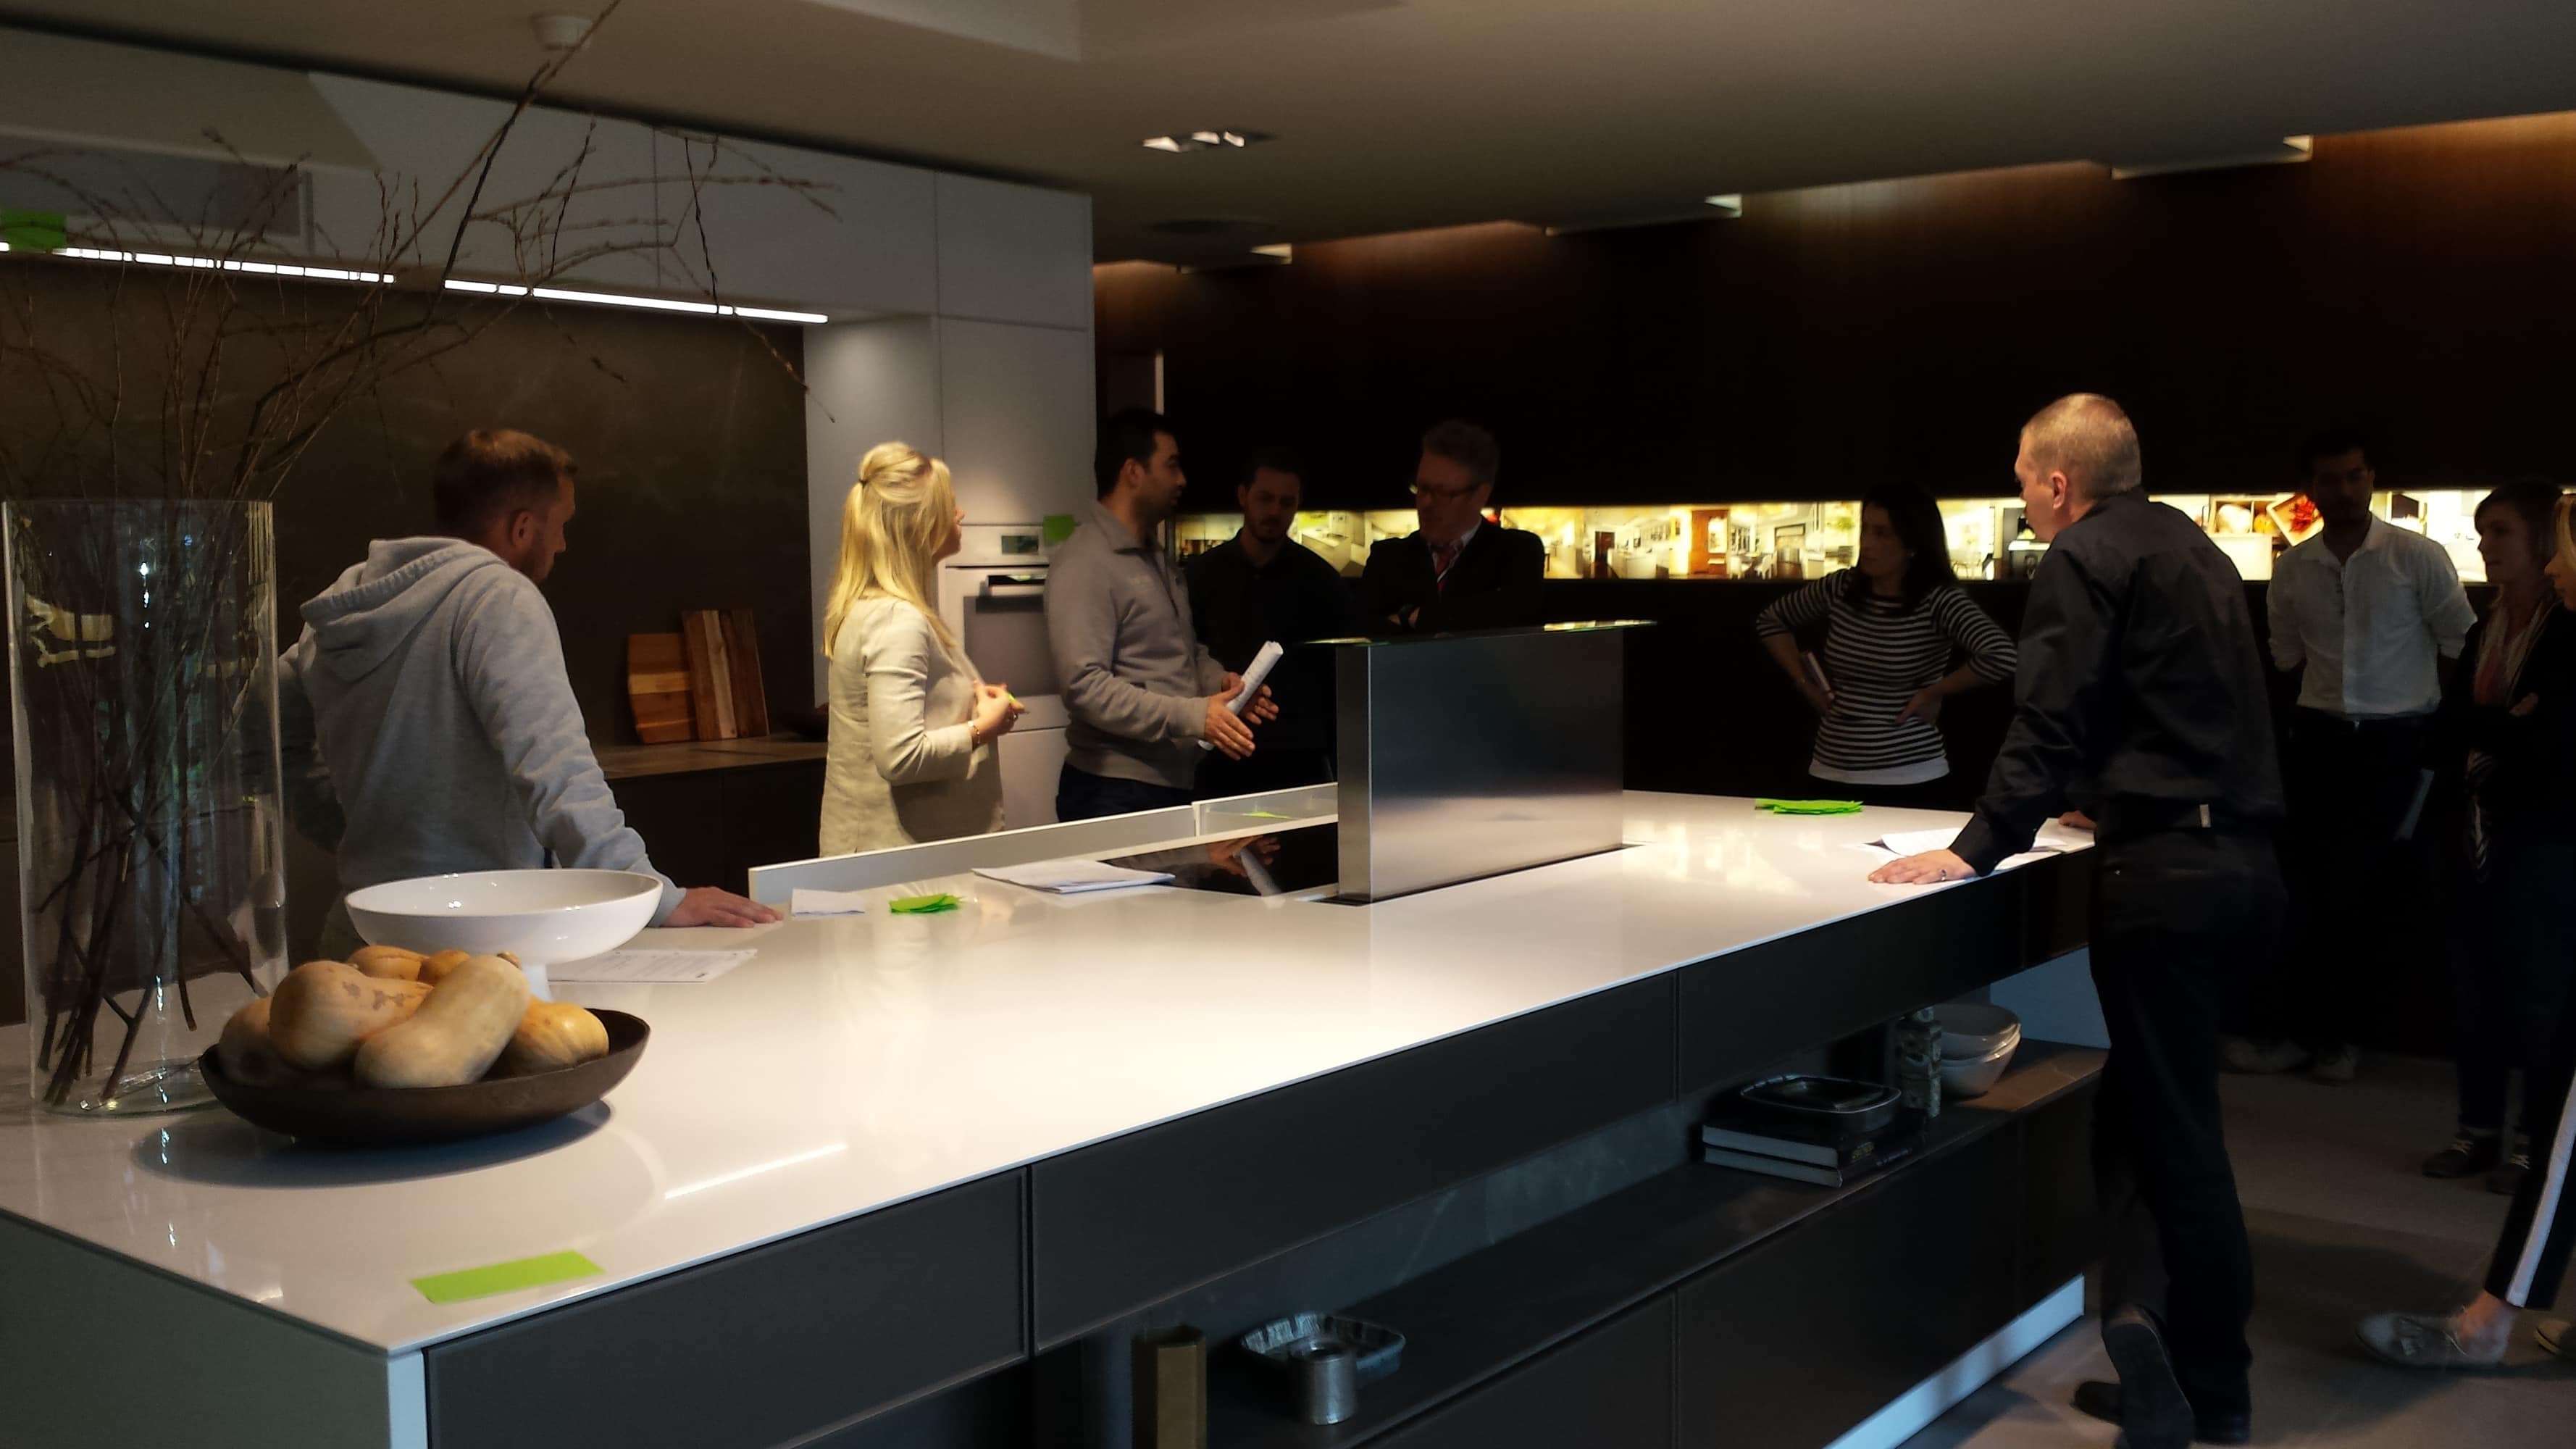 The SieMatic training academy